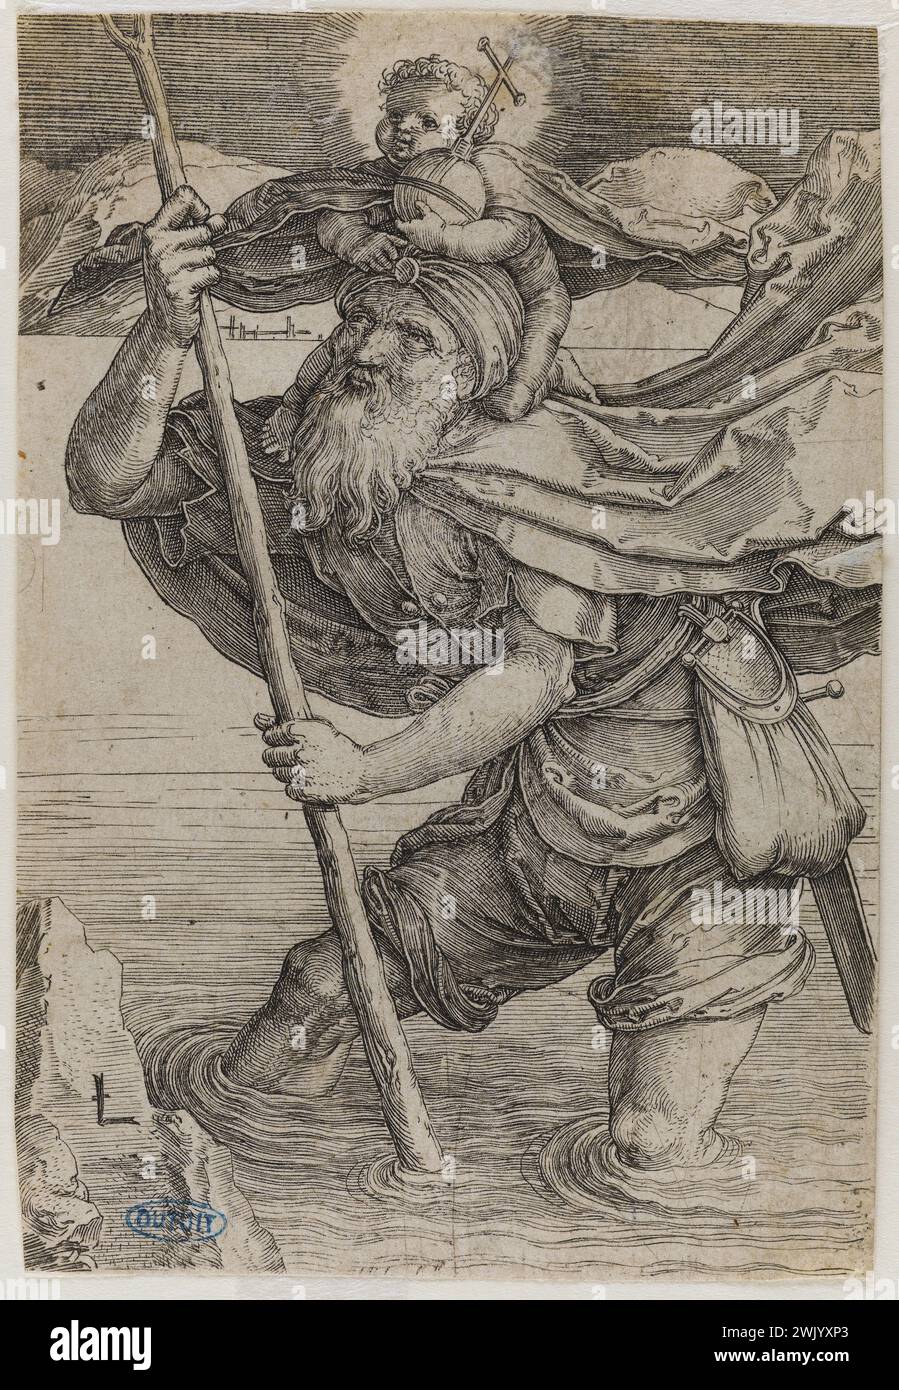 Lucas de Leyde (1494-1533). 'Saint Christophe carrying the child Jesus' - Bartsch 109. 1521. Museum of Fine Arts of the city of Paris, Petit Palais. 73056-7 Religious art, baton, bible, chisel, Christ Savior of the world, Christianity, Ruting, Dutch School, Child, Stampe, Holy History, Bearded Man, Religious Iconography, impression in brief size, Mannerism, New Testament, Work Art , Orb, biblical character, holy character, carrying, biblical, river, salvator mundi, biblical scene, religious scene, life Christ, old man, 8th century VIII 8th 8th 8th 8th arrondissement, 16th XVIth XVI 16th 16th 1 Stock Photo